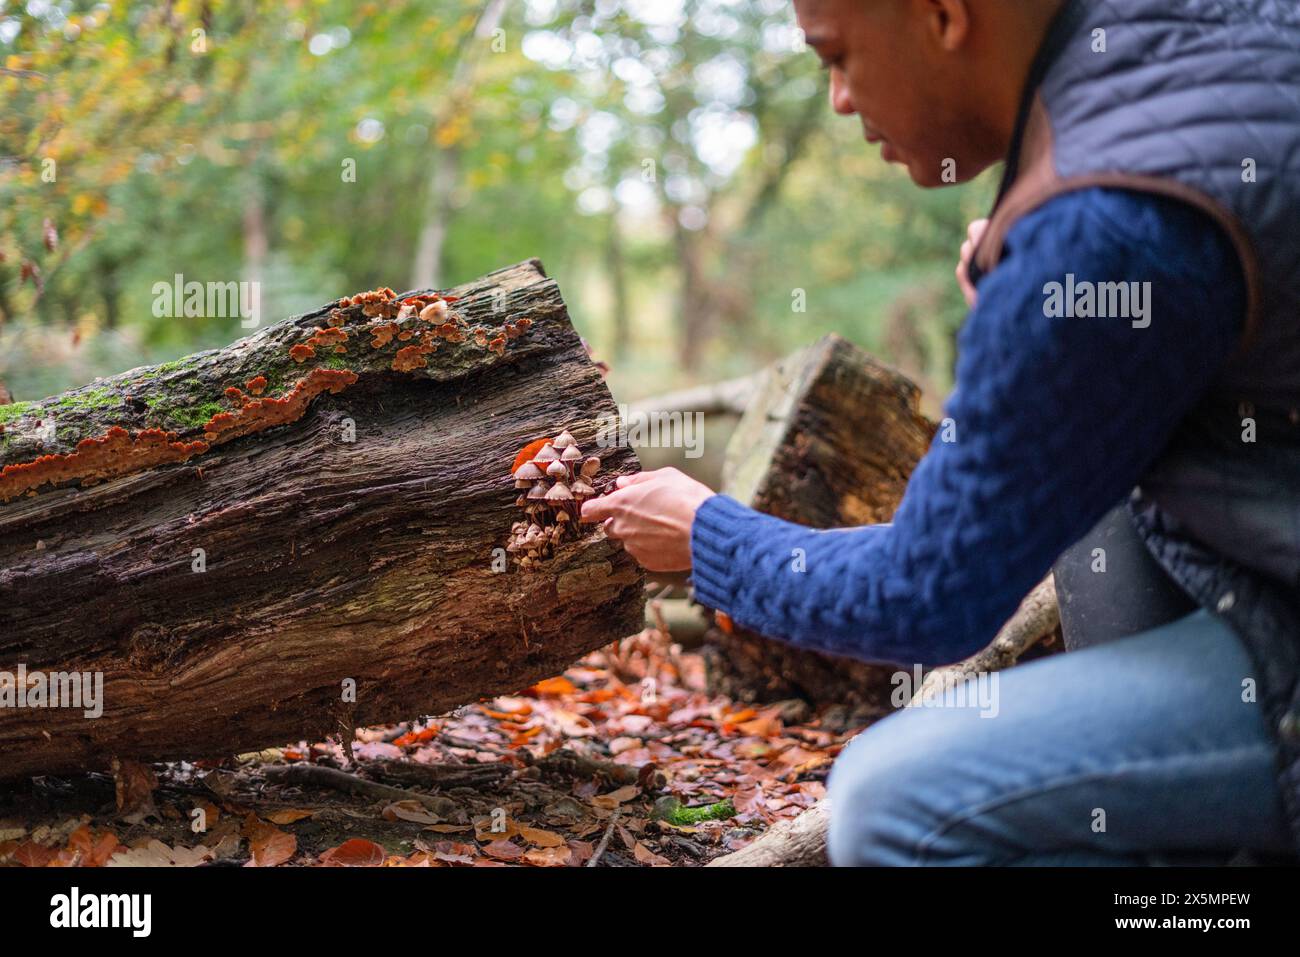 Man looking at small mushroom growing on log in forest at autumn Stock Photo